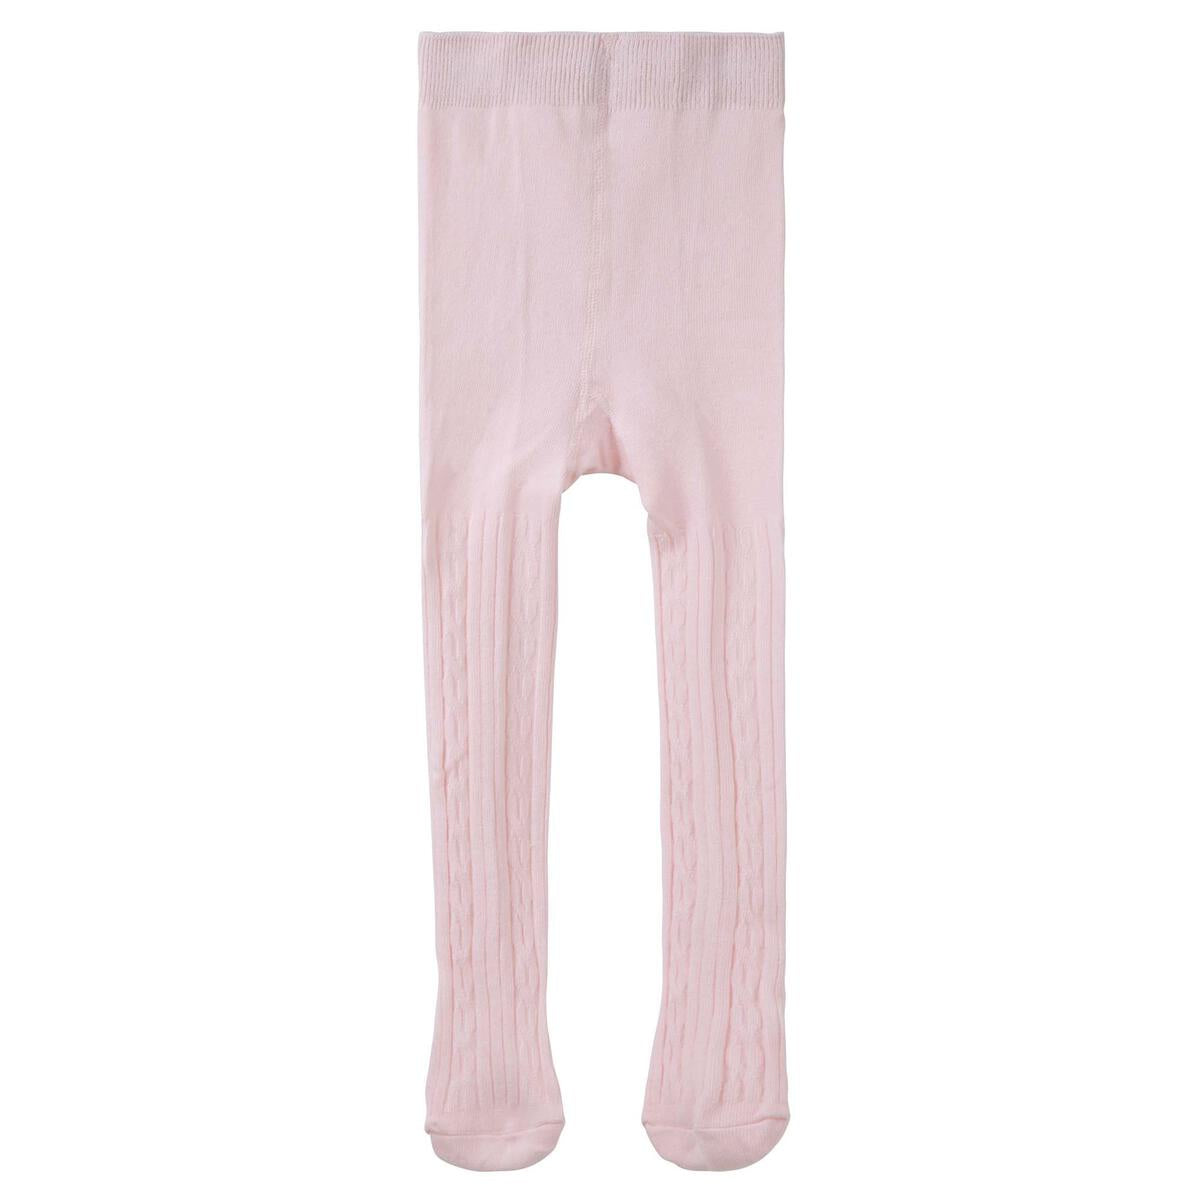 DESIGNER KIDZ | Baby Cable Knit Tights - Pink